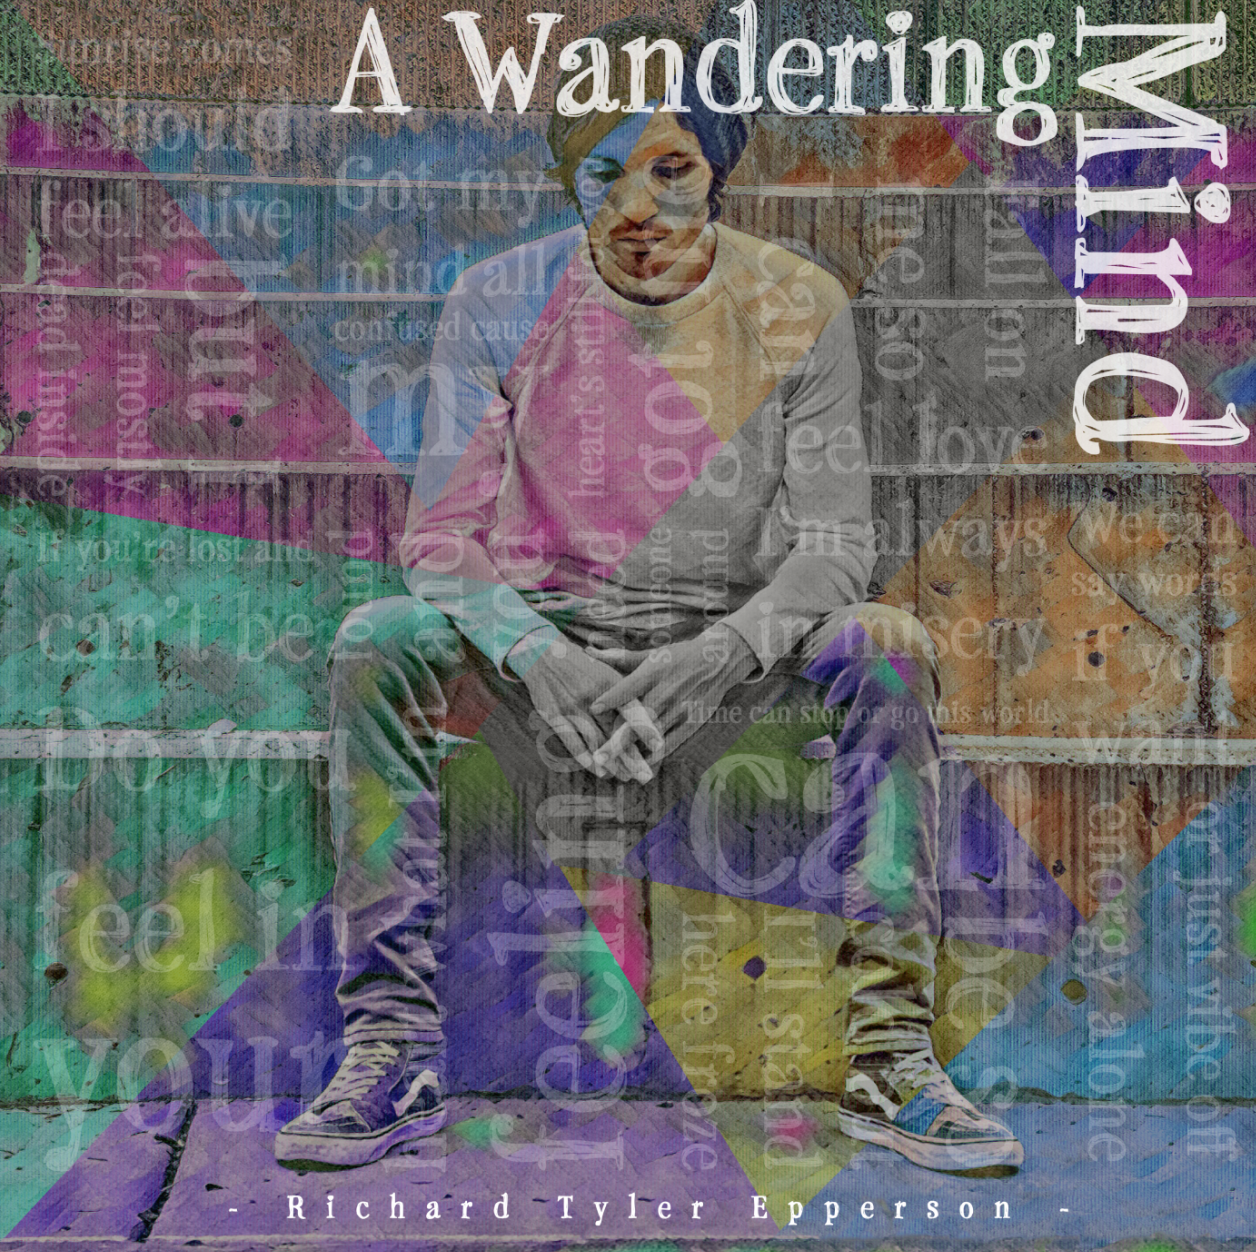 Richard Tyler Epperson The Wandering Mind